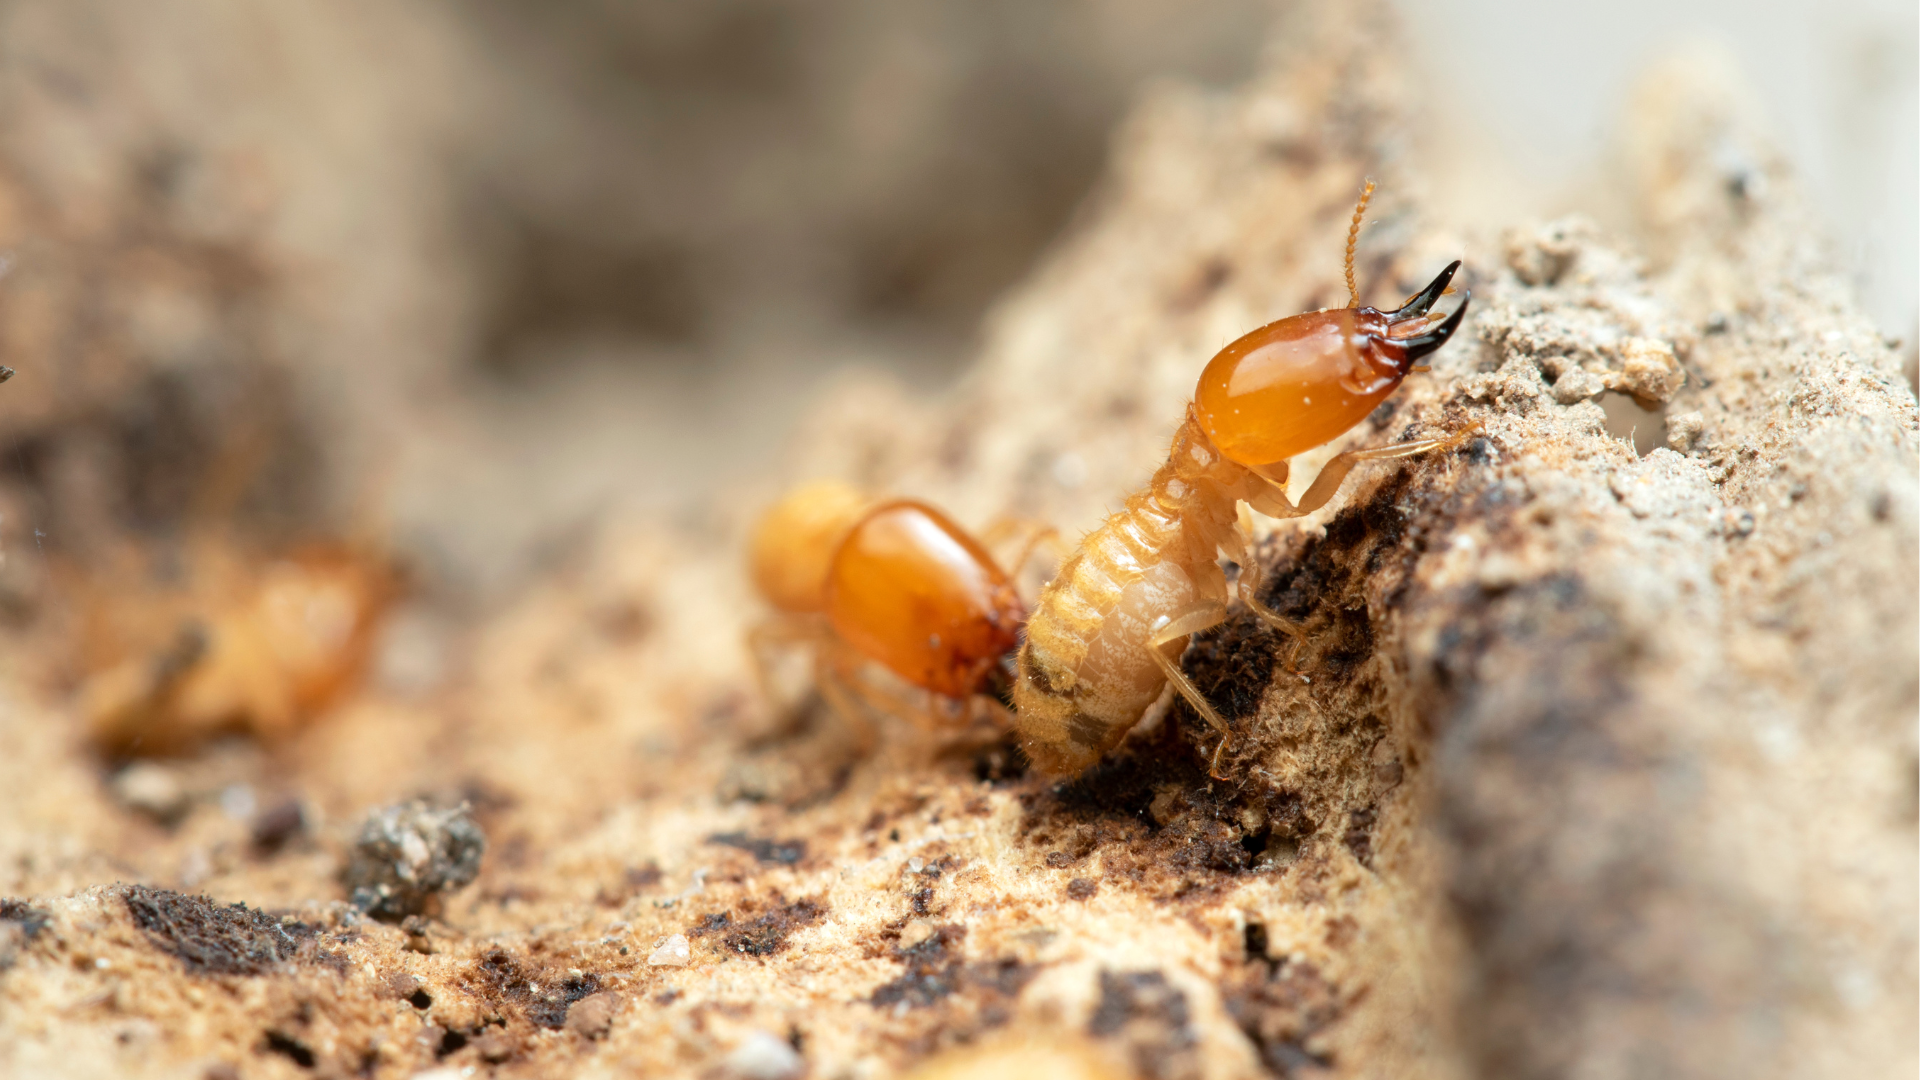 encounter drywood termites from wooden objects they order or transport.